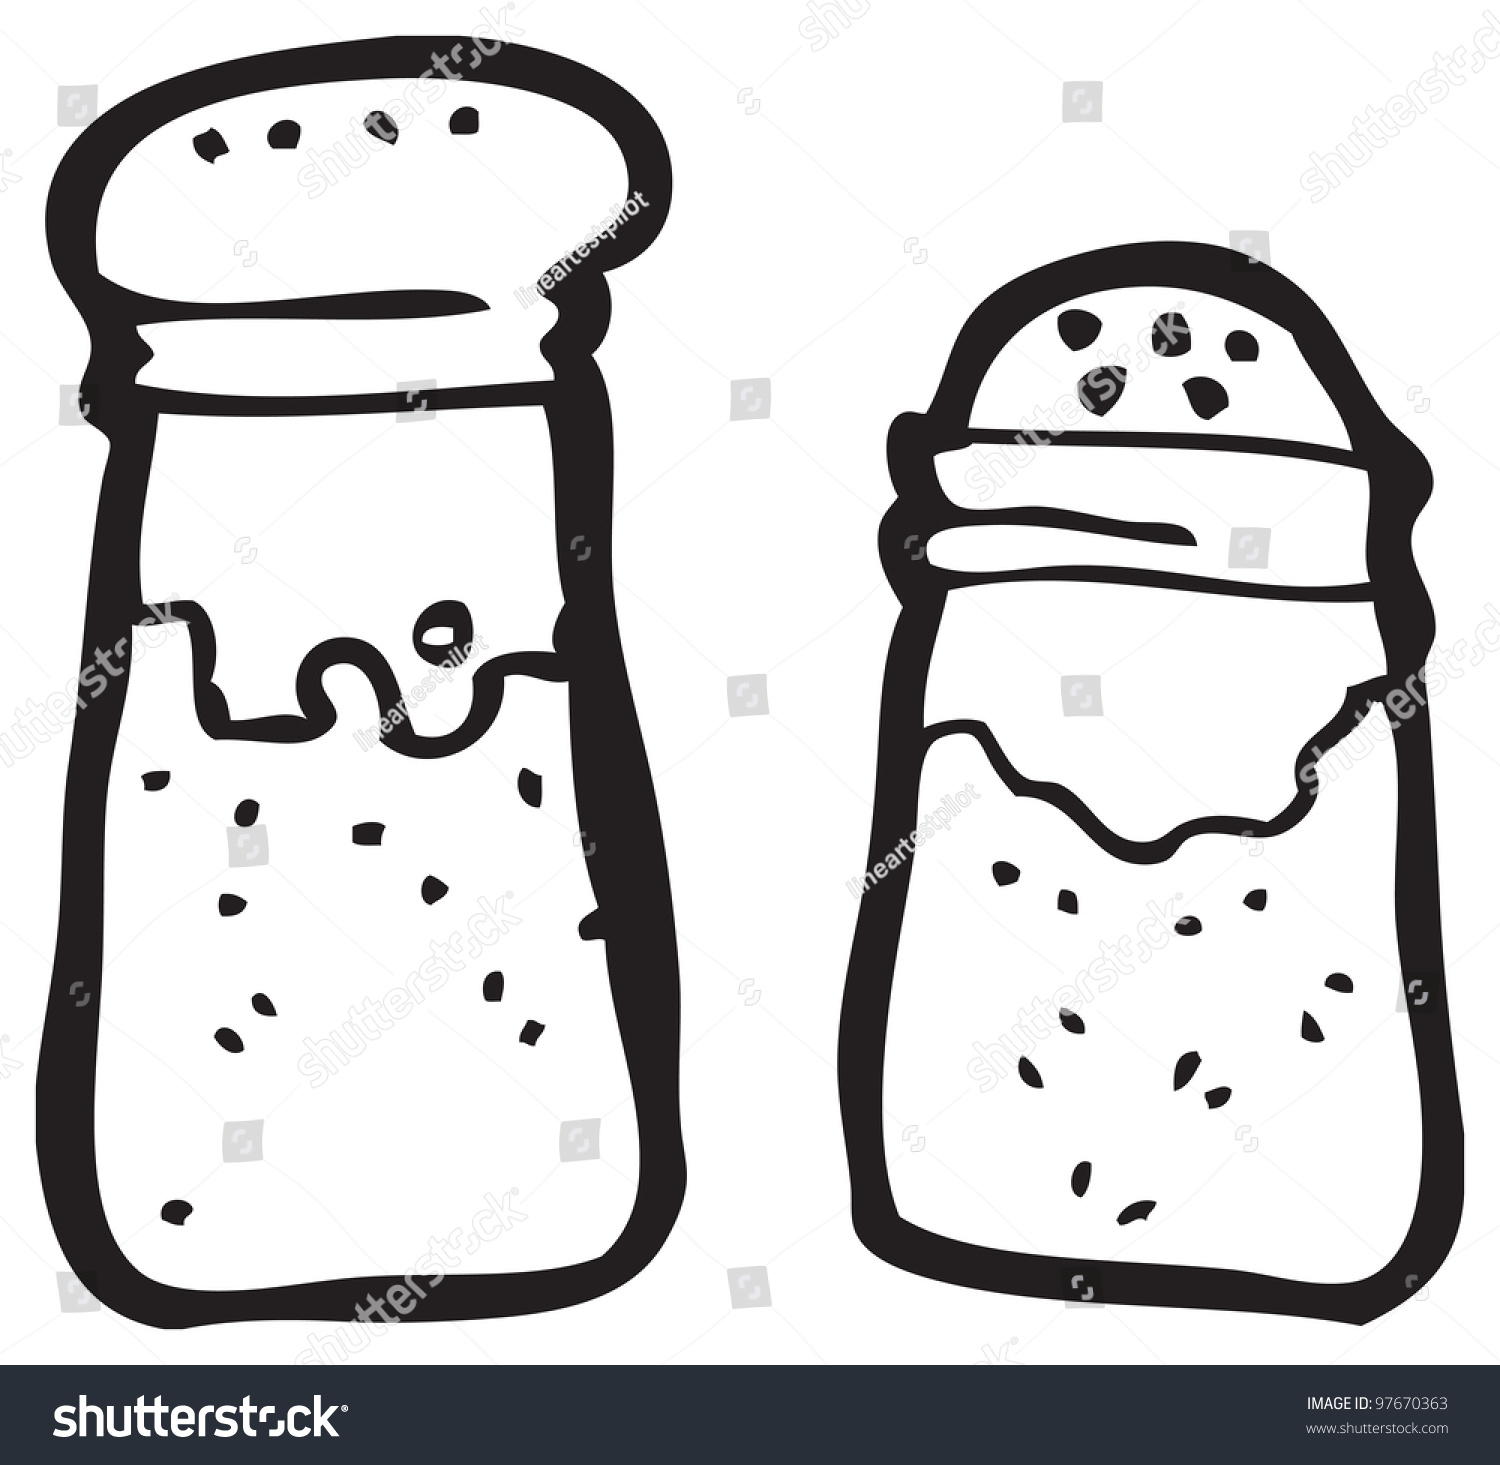 Find Cartoon Salt Pepper Shakers stock images in HD and millions of other r...